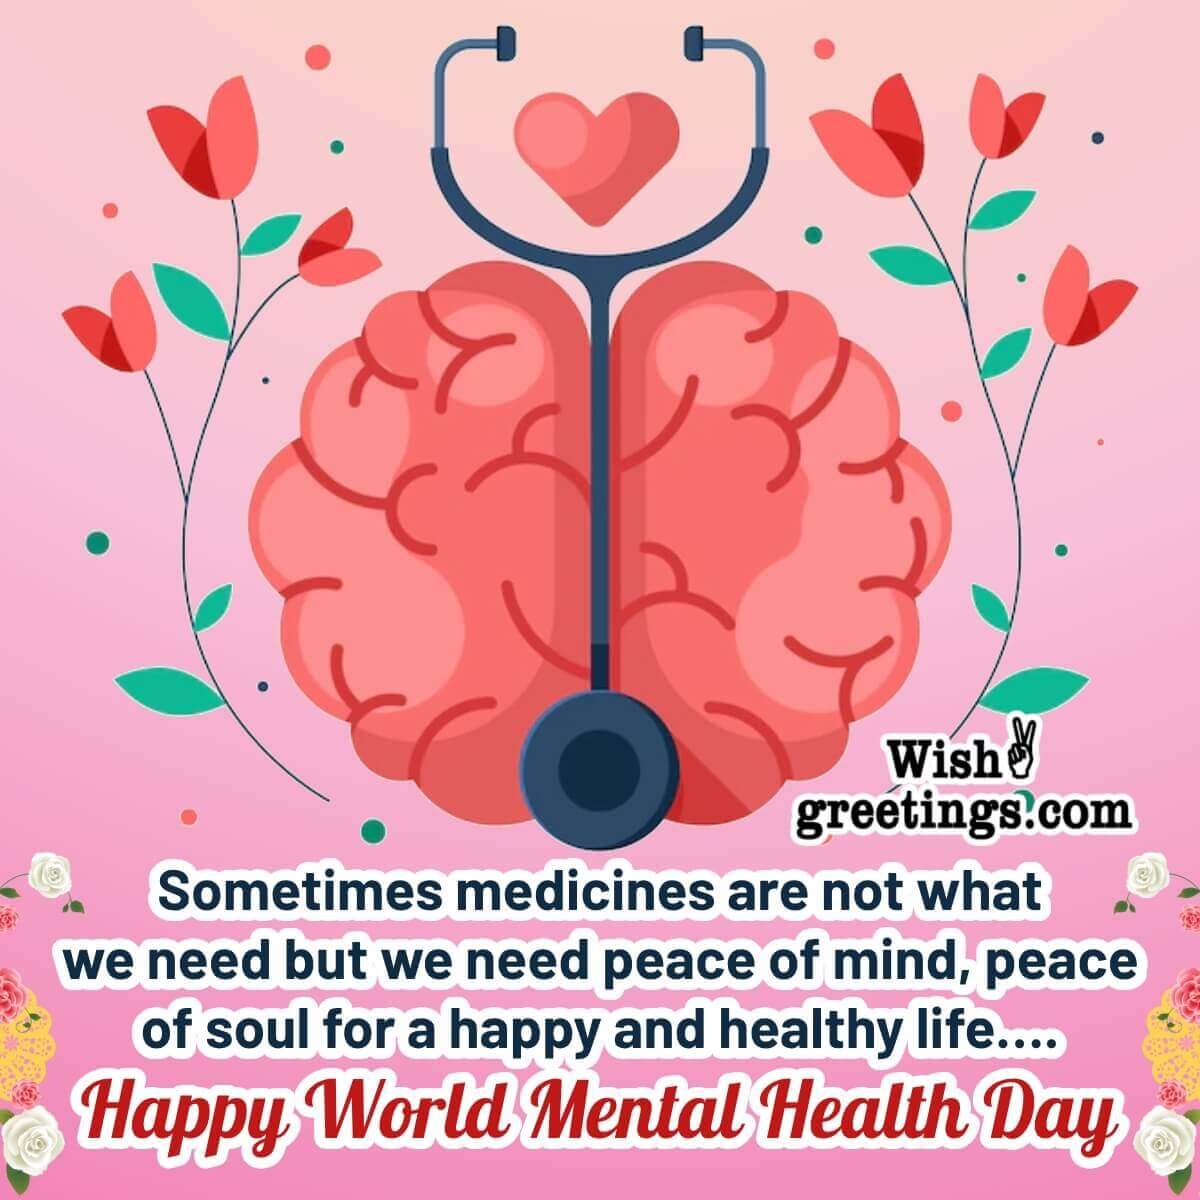 World Mental Health Day Message Pic